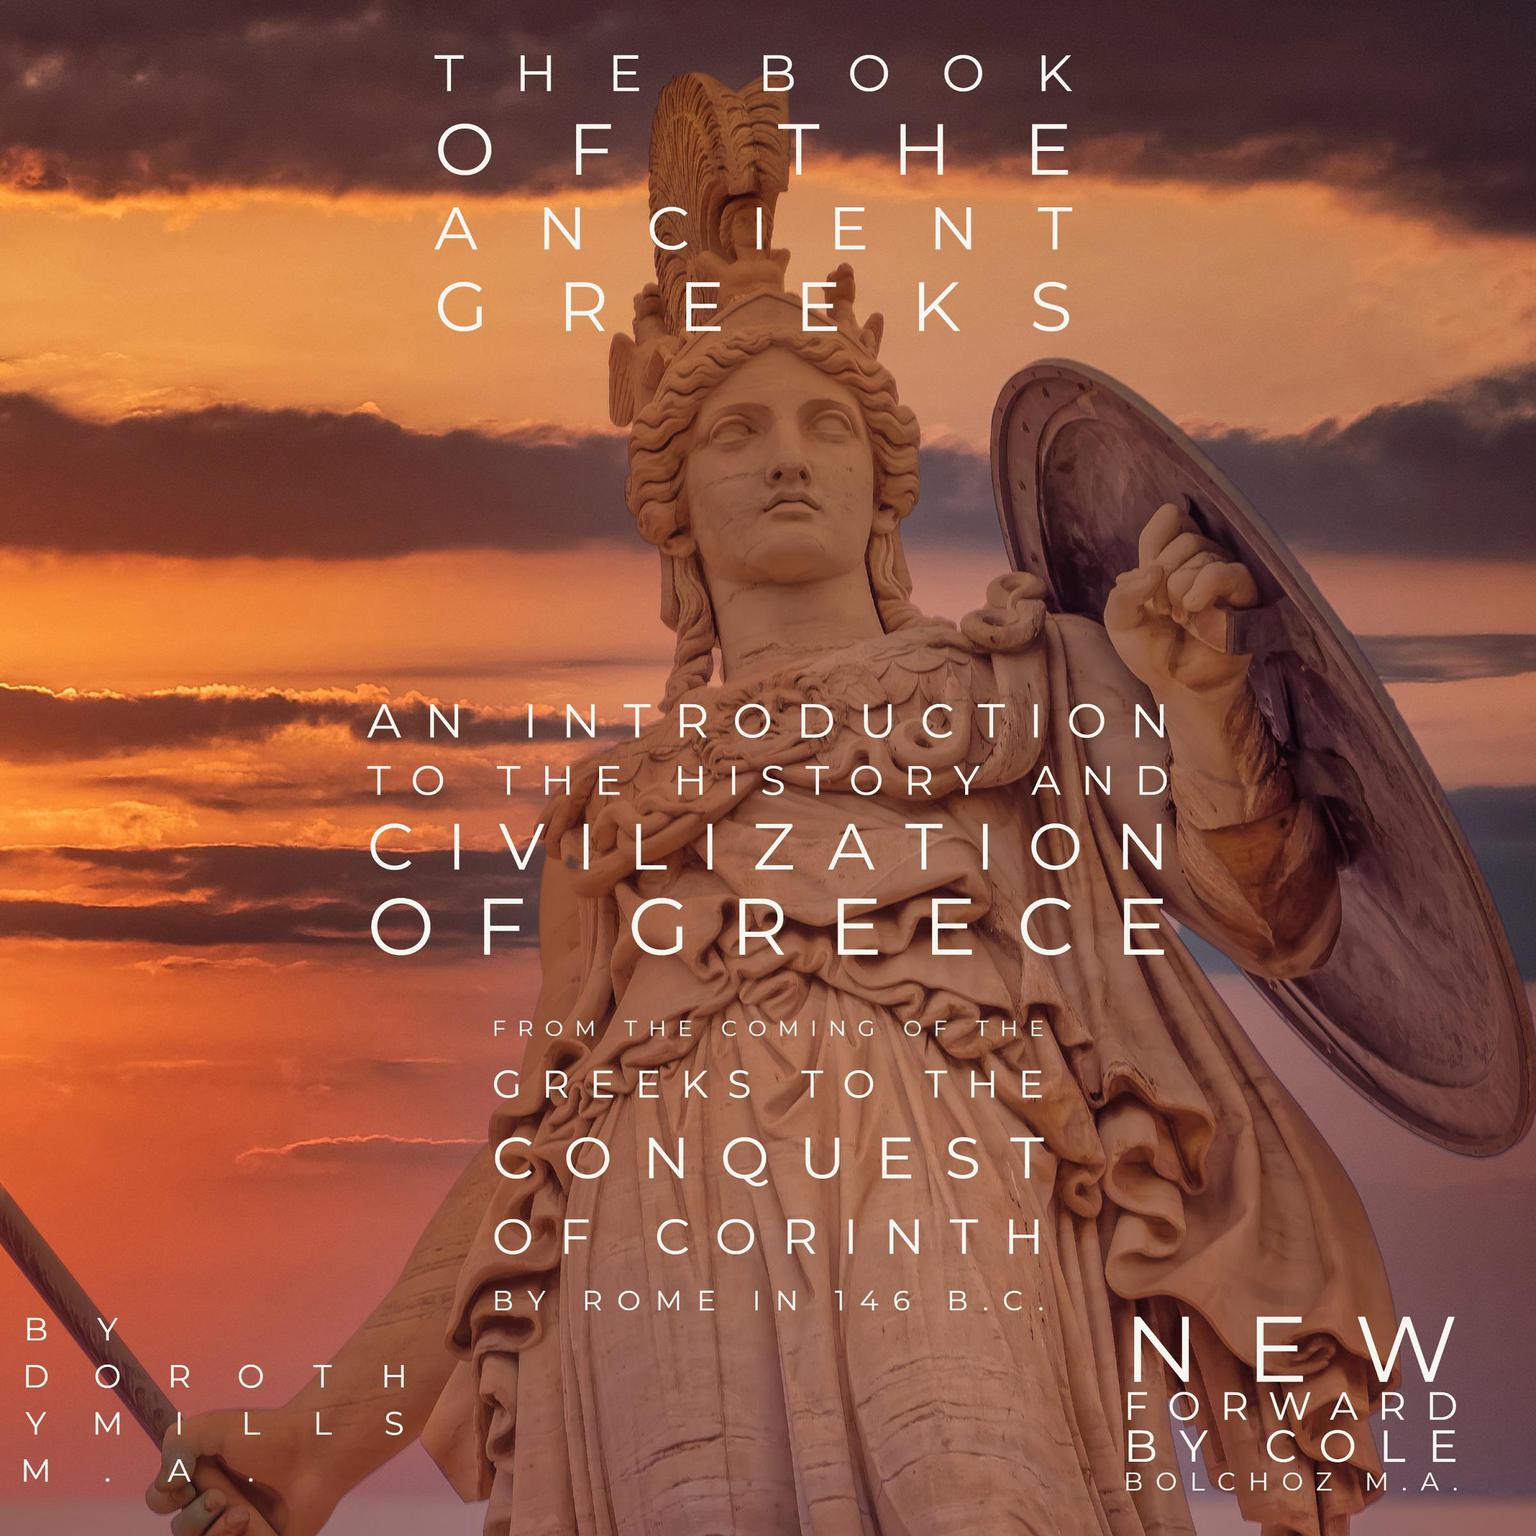 The Book of the Ancient Greeks (Abridged): An Introduction to the History and Civilization of Greece from the Coming of the Greeks to the Conquest of Corinth by Rome in 146 B.C. Audiobook, by Cole Bolchoz